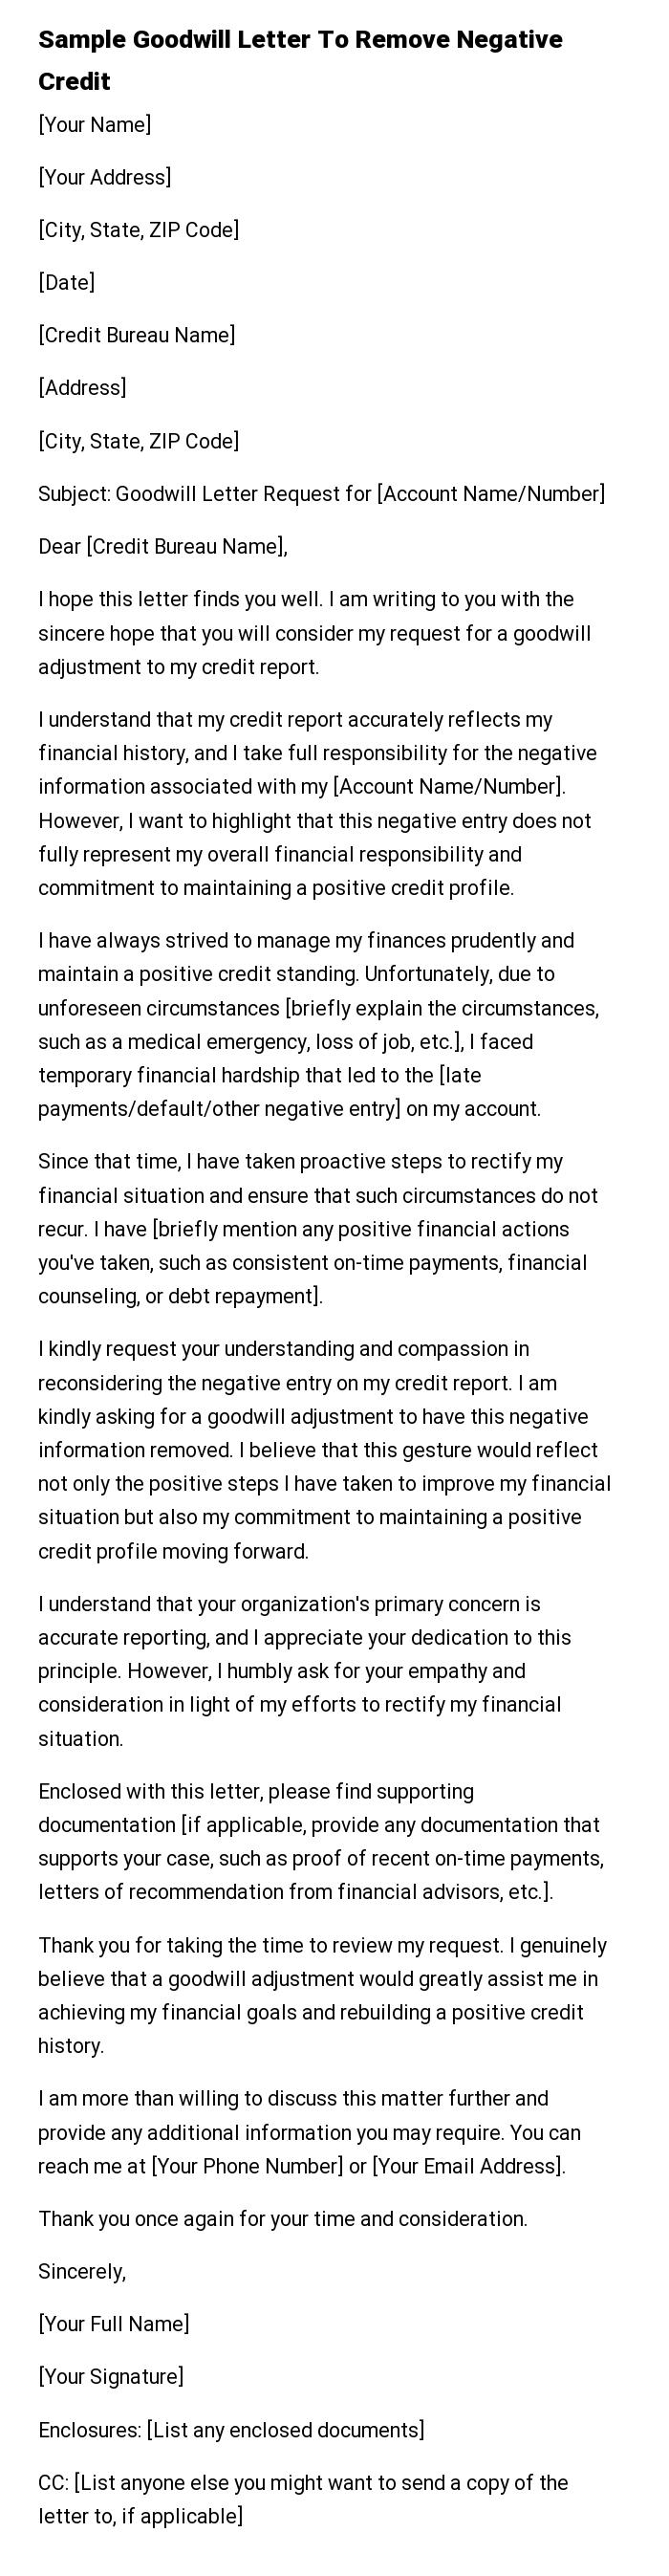 Sample Goodwill Letter To Remove Negative Credit